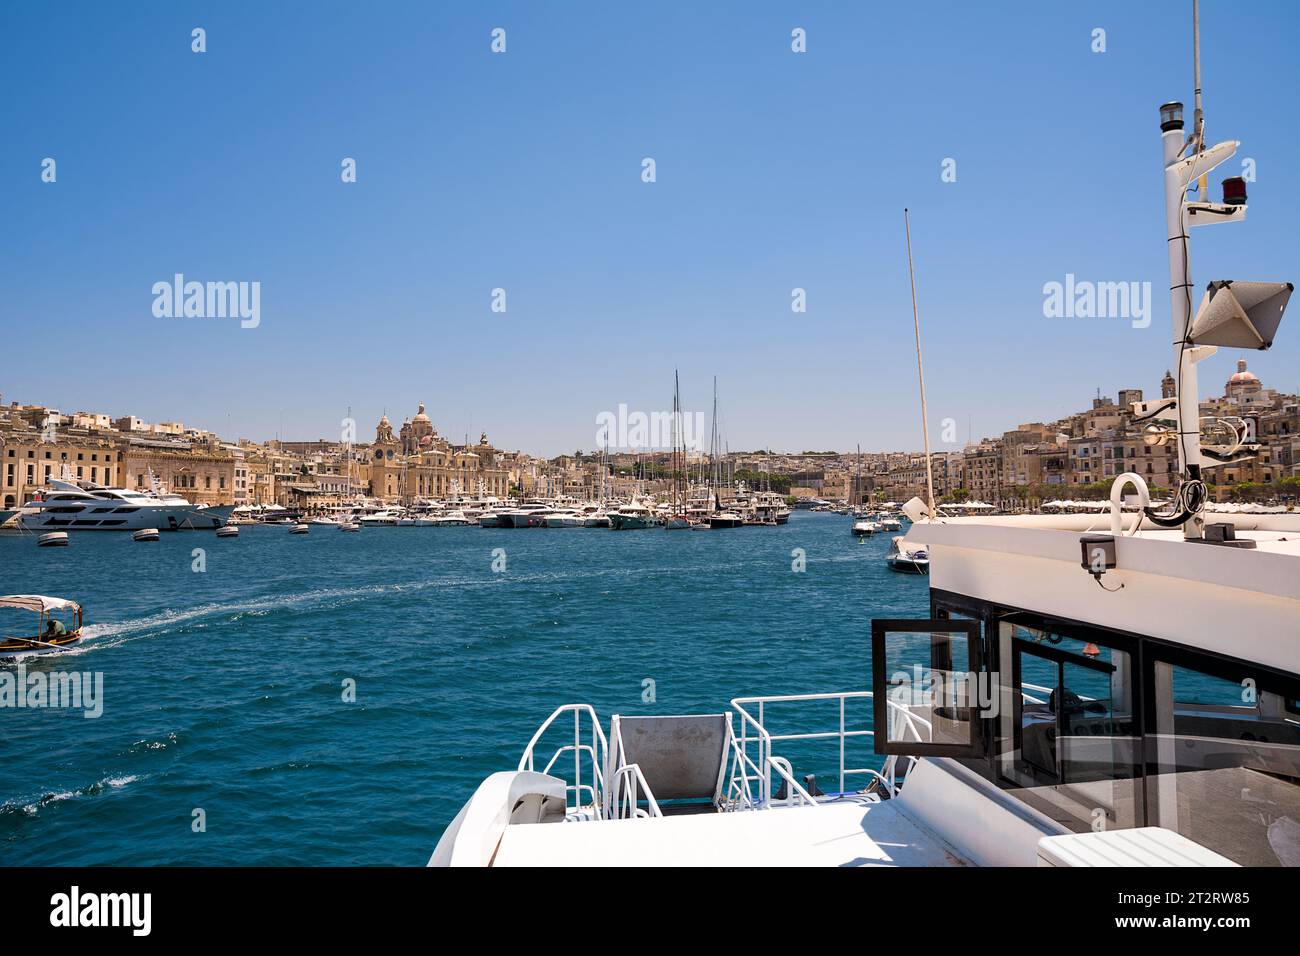 Vittoriosa, Malta - 17 June 2023: Vittoriosa harbor with yachts and boats and the dome of the cathedral in the background, taken from board the ferry Stock Photo